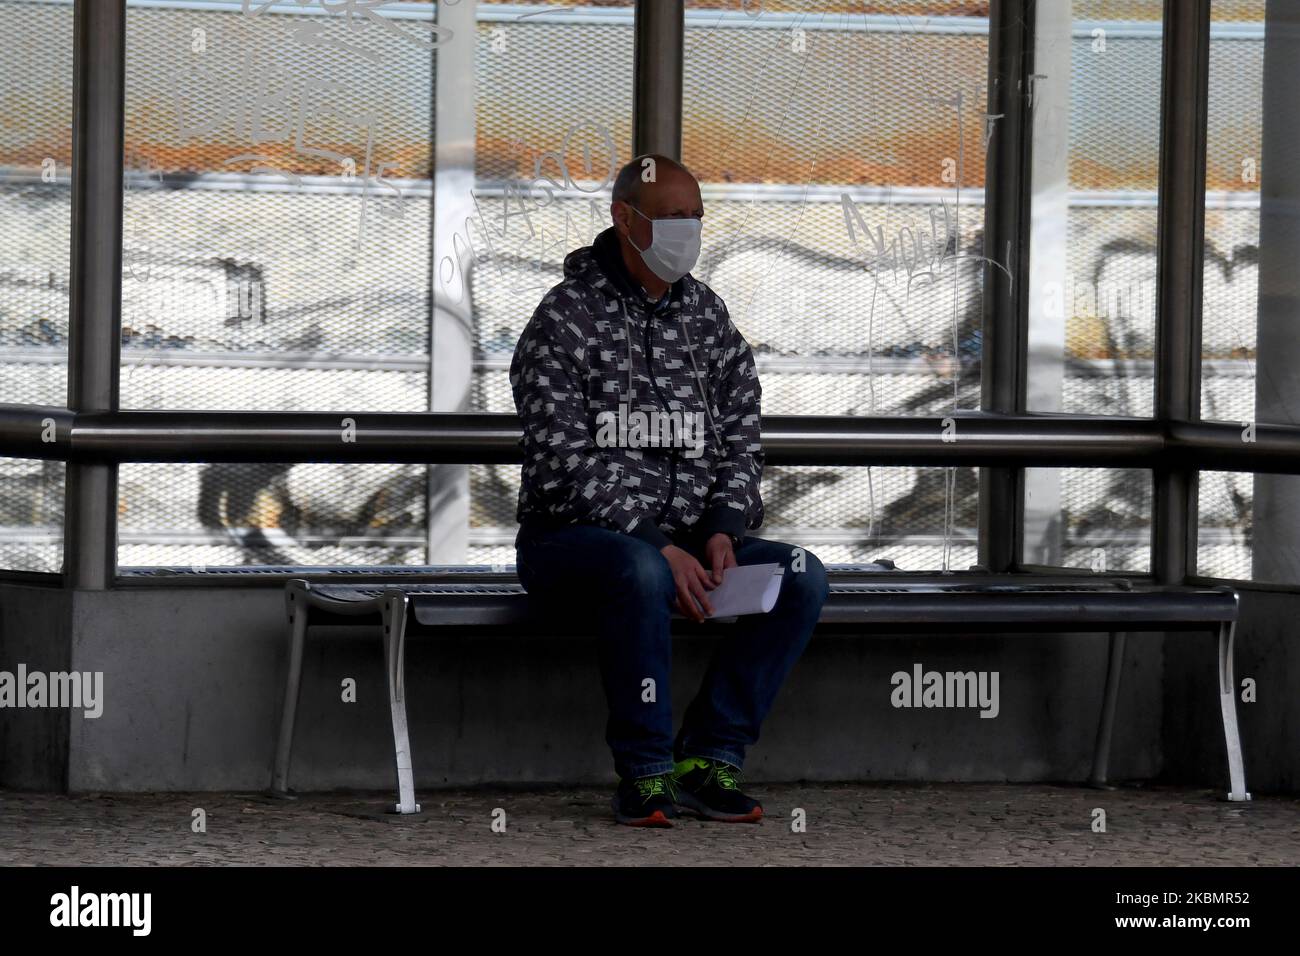 A man wearing a mask stands around the train station of Sintra, 22 April 2020. The devastation of the COVID-19 pandemic has shaken tourism, one of the main pillars of the Portuguese economy. The pandemic has attacked the tourism sector 'in an extremely violent manner' according to statements by political leaders of the Lusitanian nation. The Minister of Labor announced that her ministry has received more than 1,400 requests for simplified dismissal, which allows companies to suspend employment contracts or reduce employees' working hours. (Photo by Jorge Mantilla/NurPhoto) Stock Photo